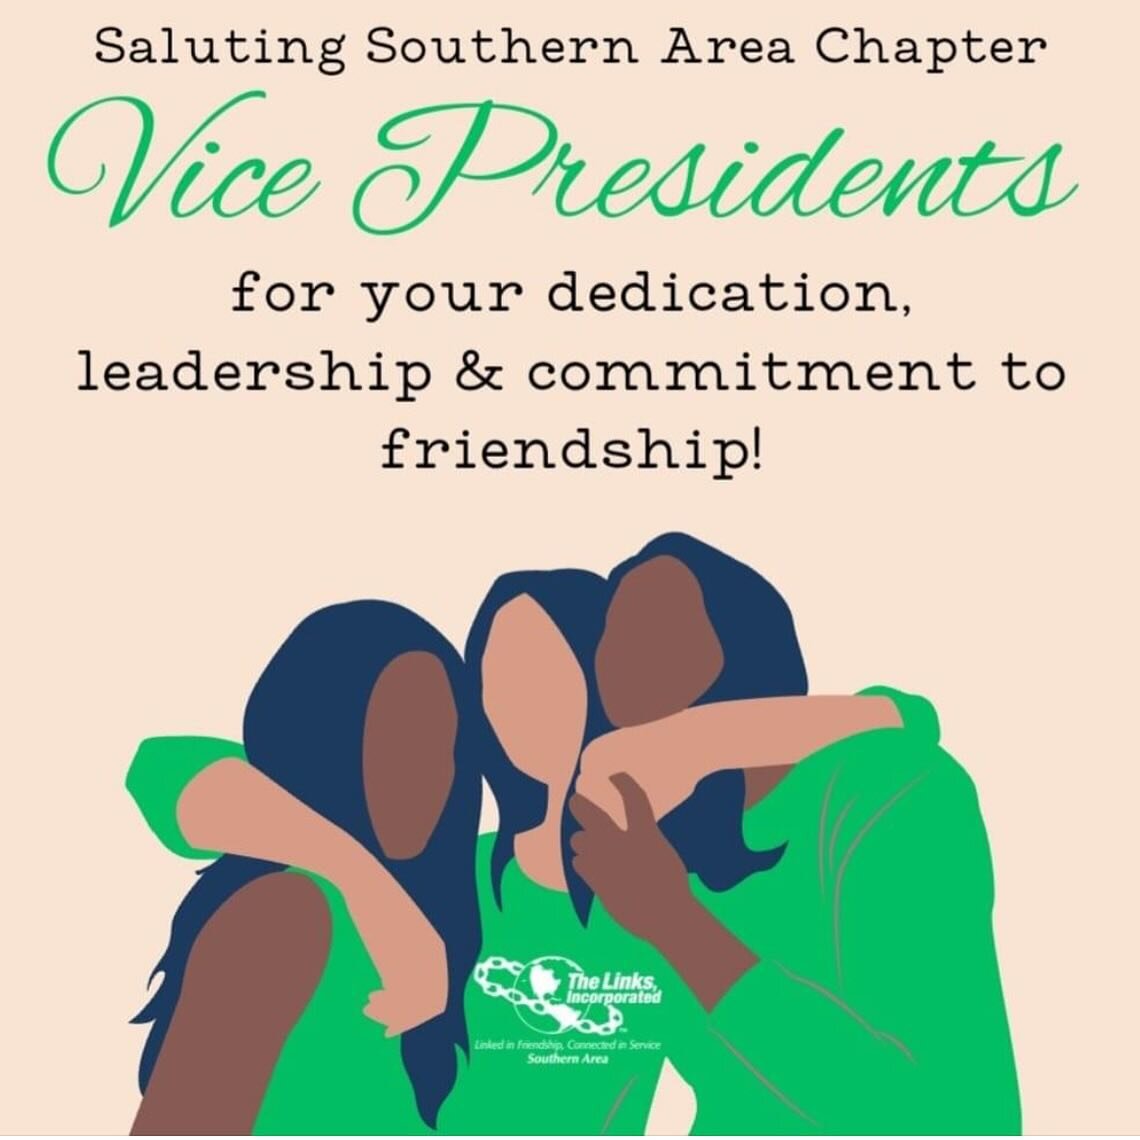 The Aiken (SC) Chapter proudly salutes our Vice President, Stephanie Franklin. Thank you for your dedication to our chapter in all you do 💚🤍🔗 #salinksinc #friendship365 #intentionalfriendship #linksincorporated